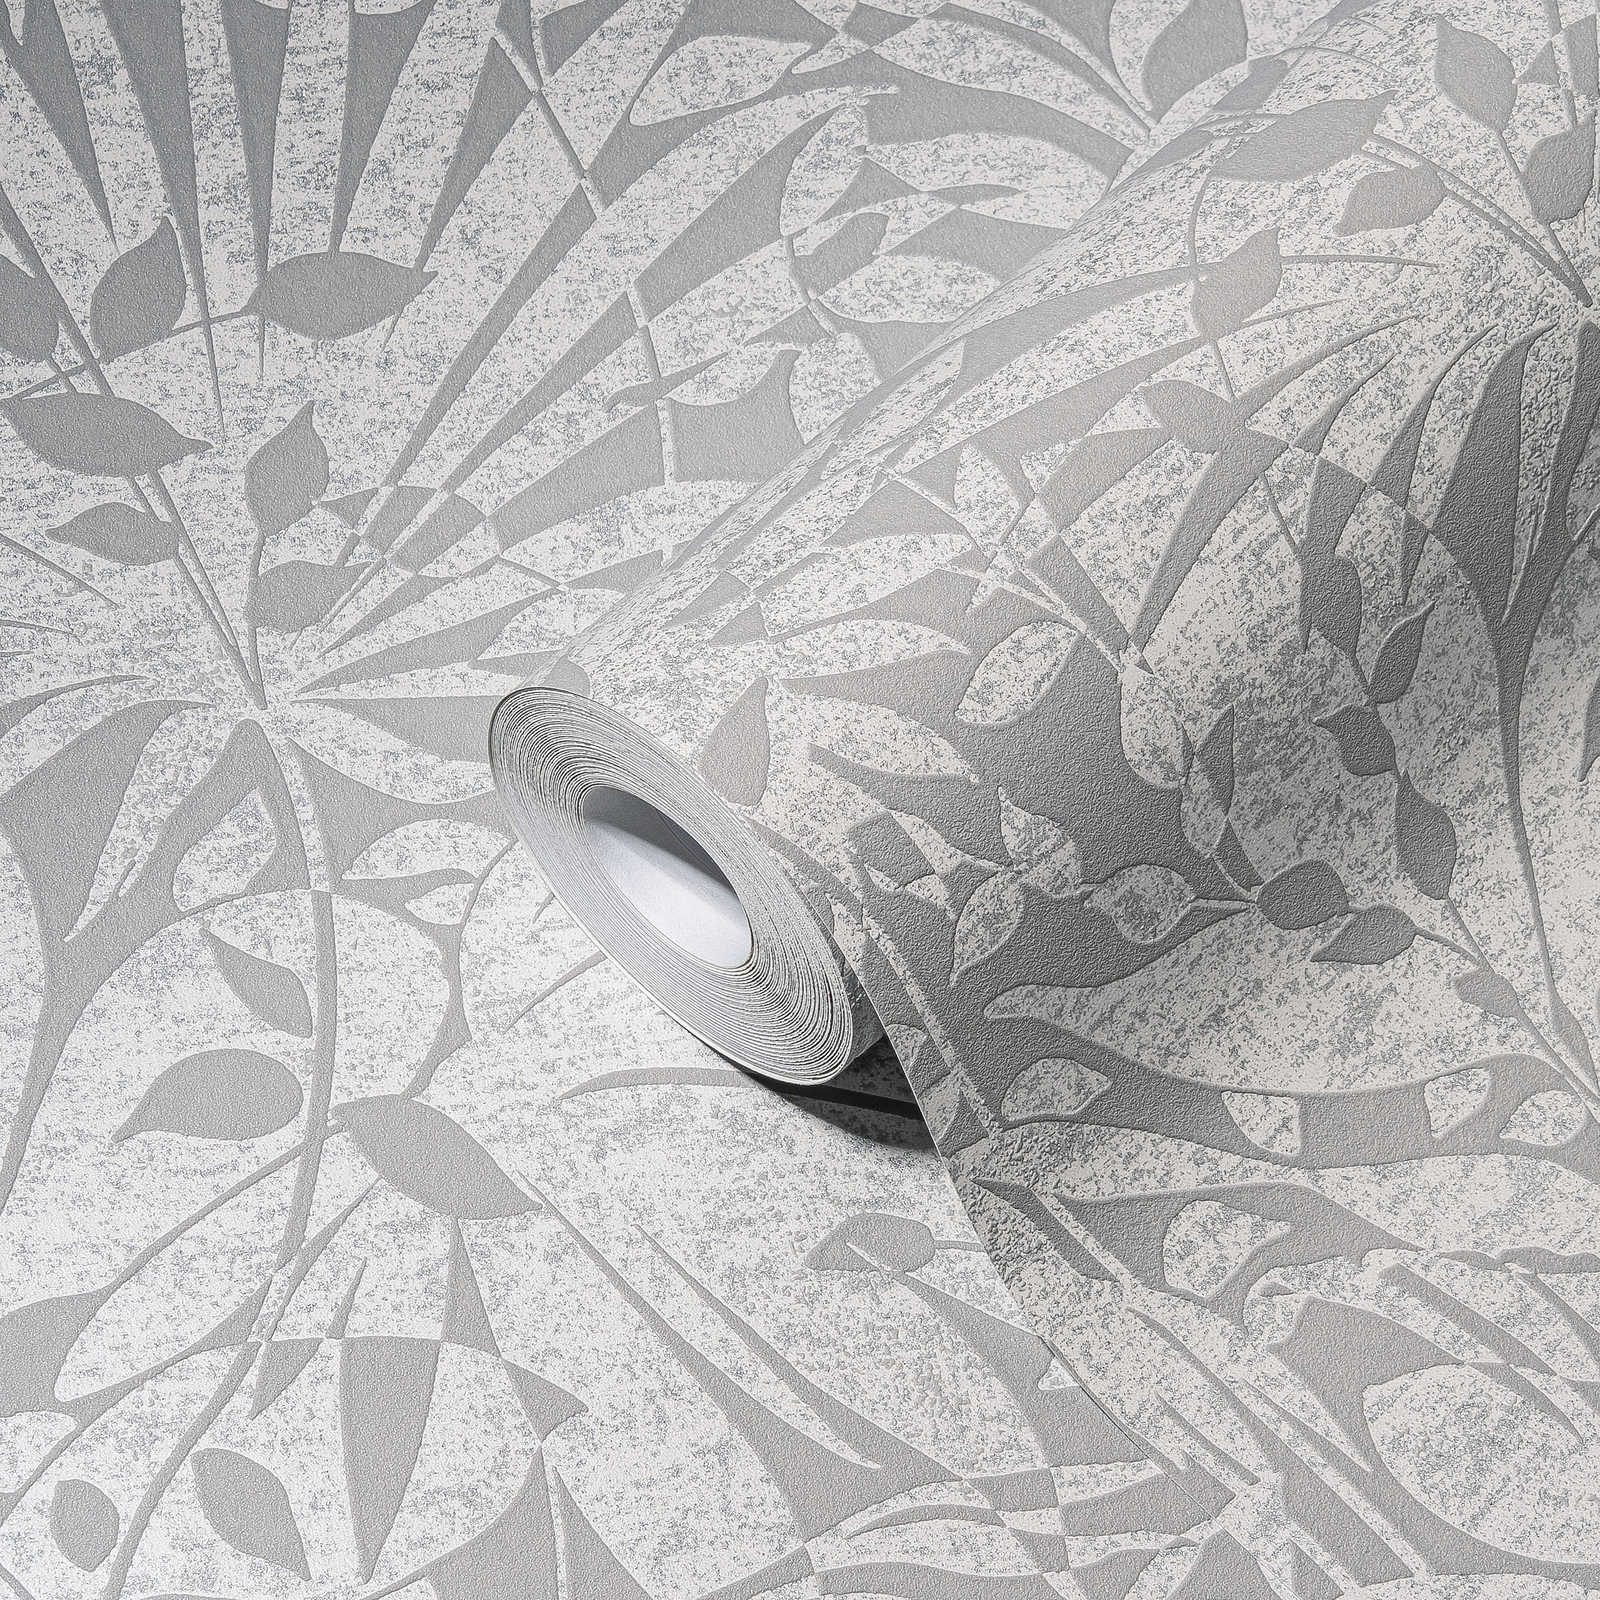             Grey leaves wallpaper with texture details and metallic effect
        